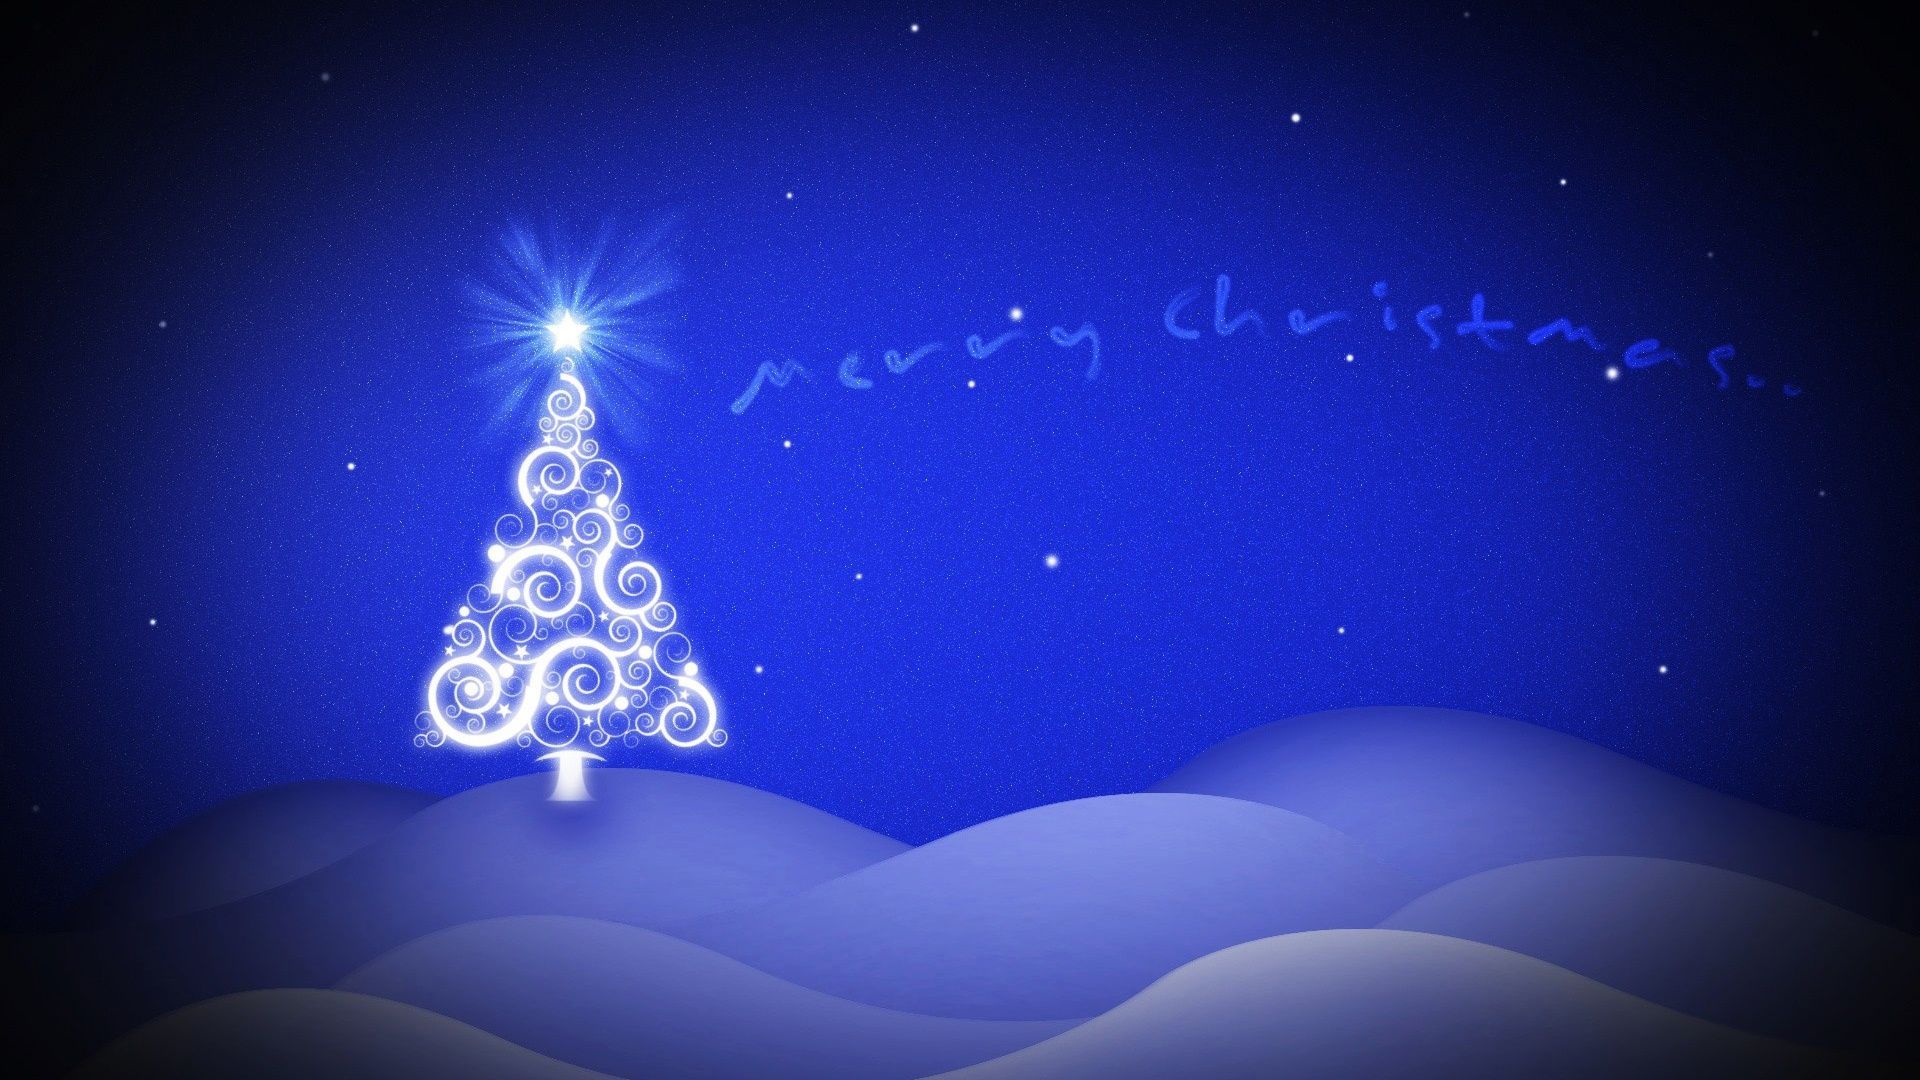 Happy New Year 2014 and Merry Christmas!. Merry christmas picture, Merry christmas wallpaper, Christmas picture